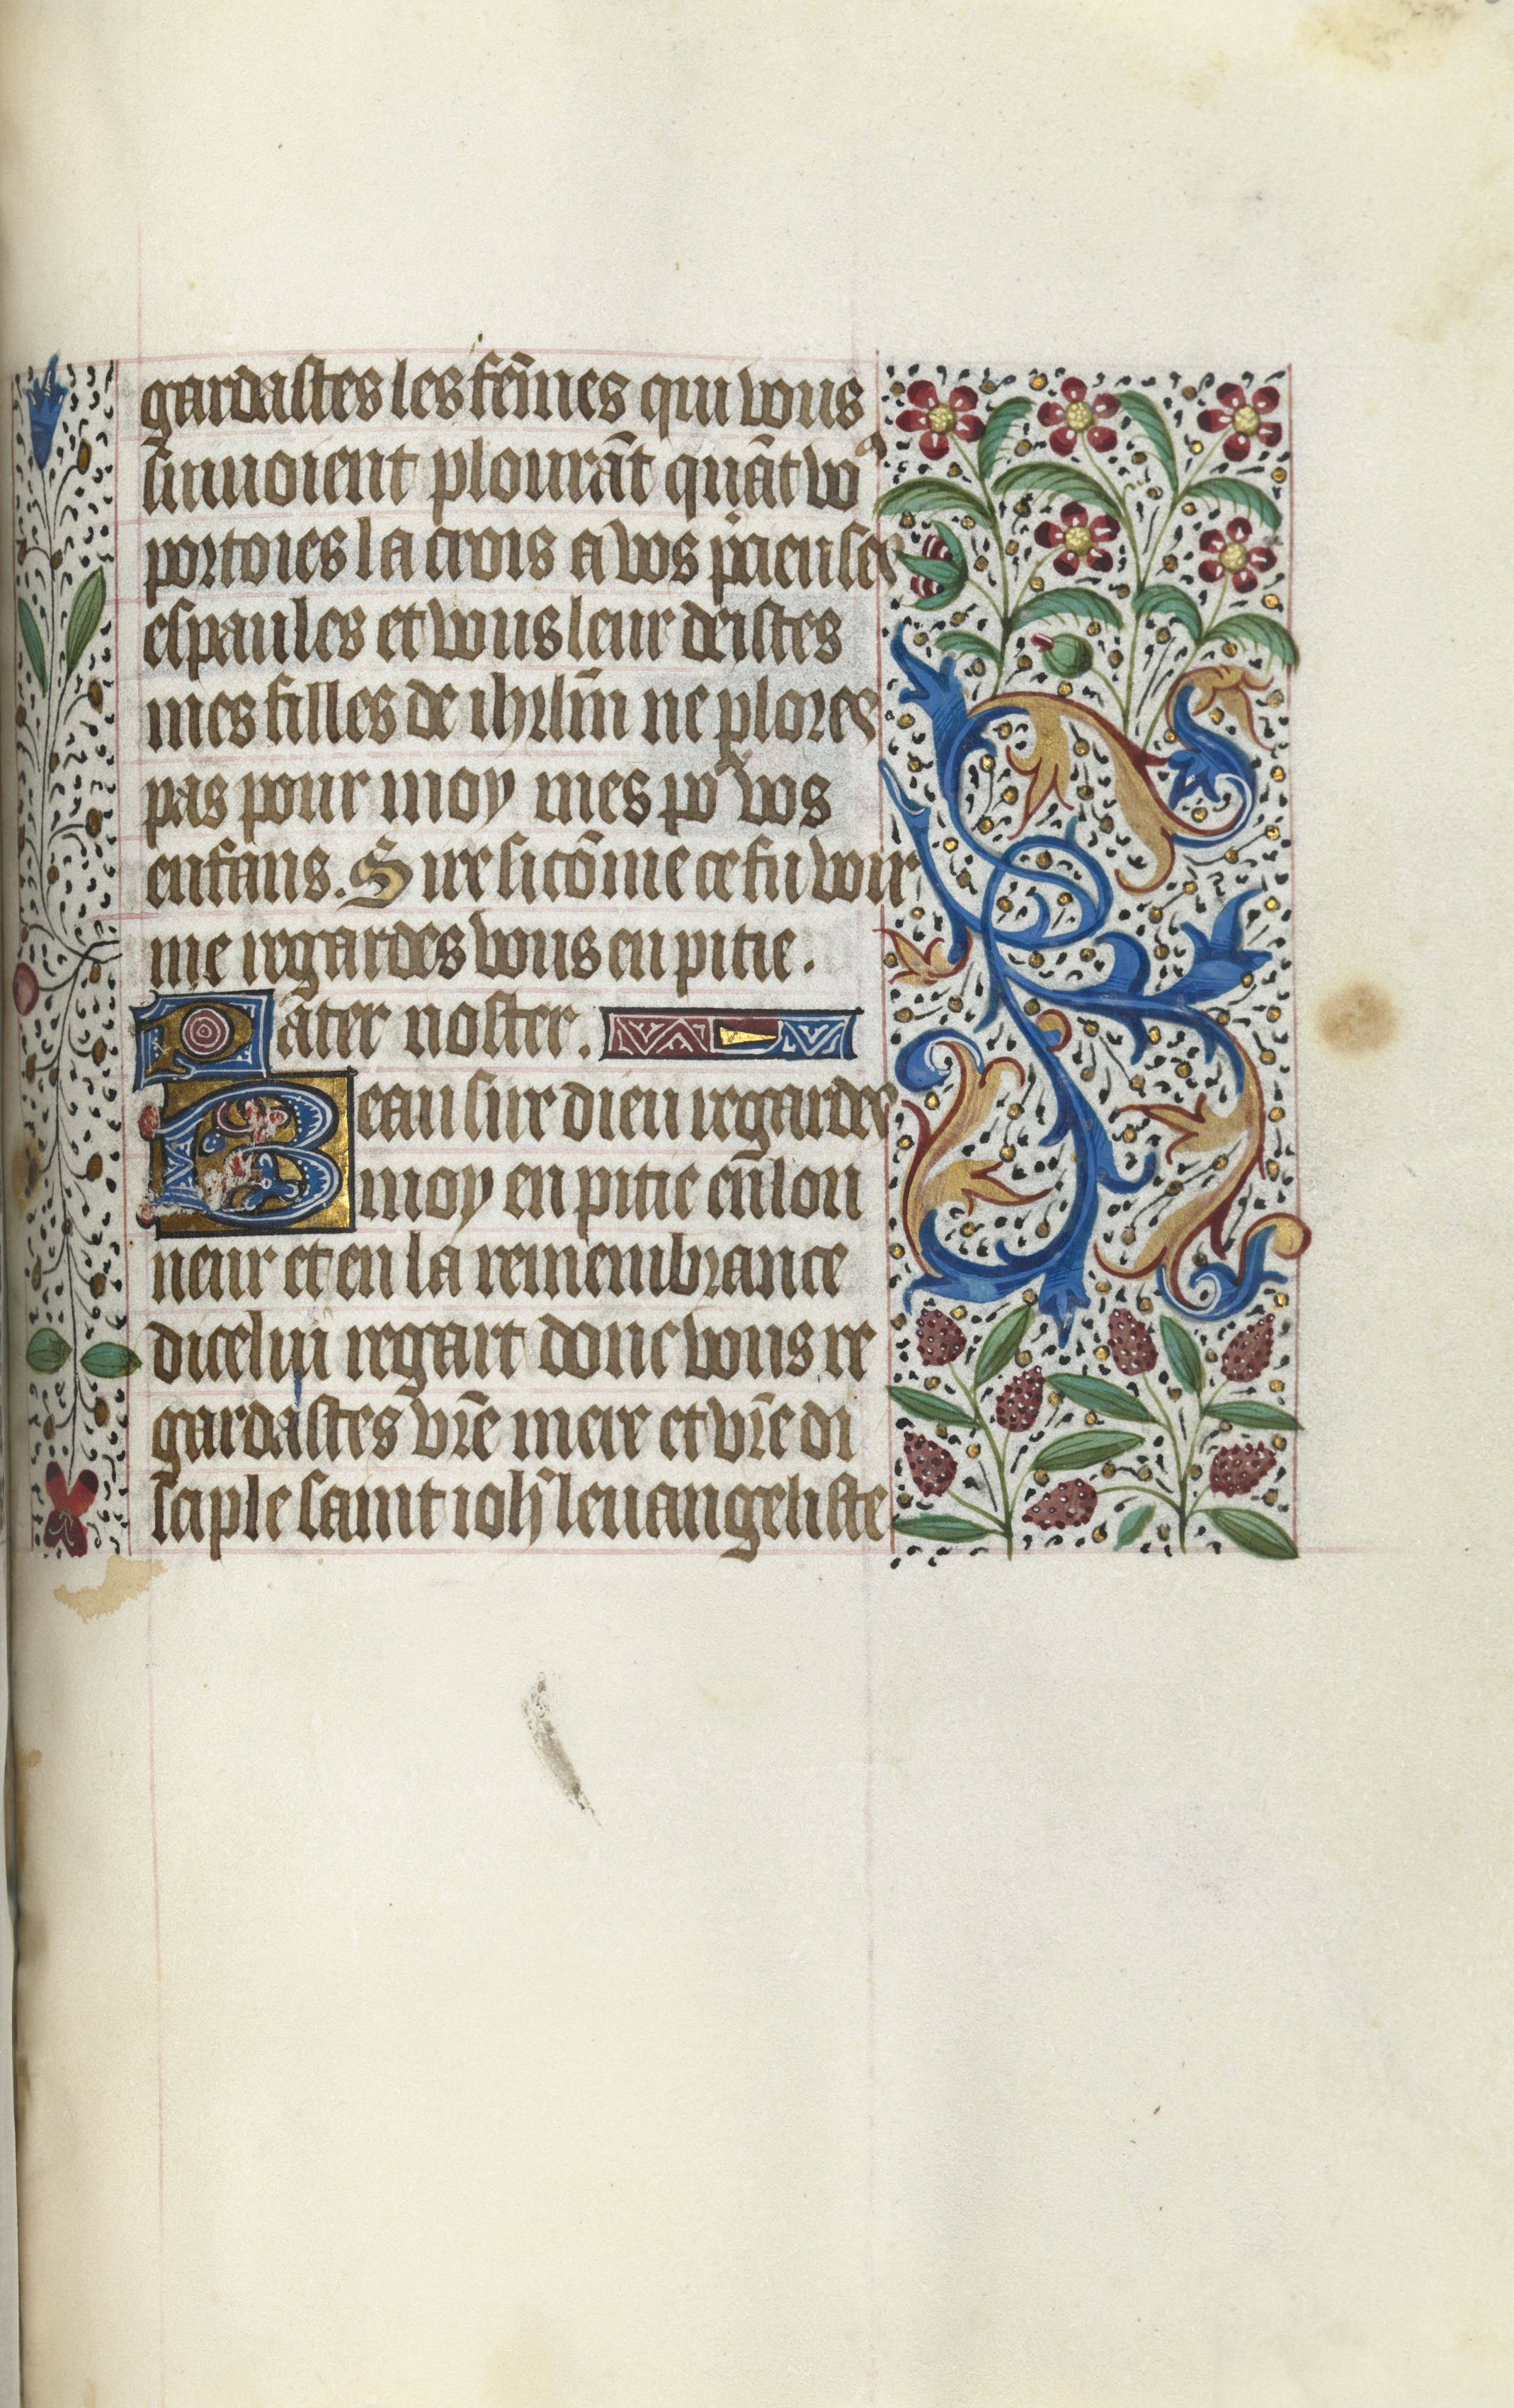 Book of Hours (Use of Rouen): fol. 154a